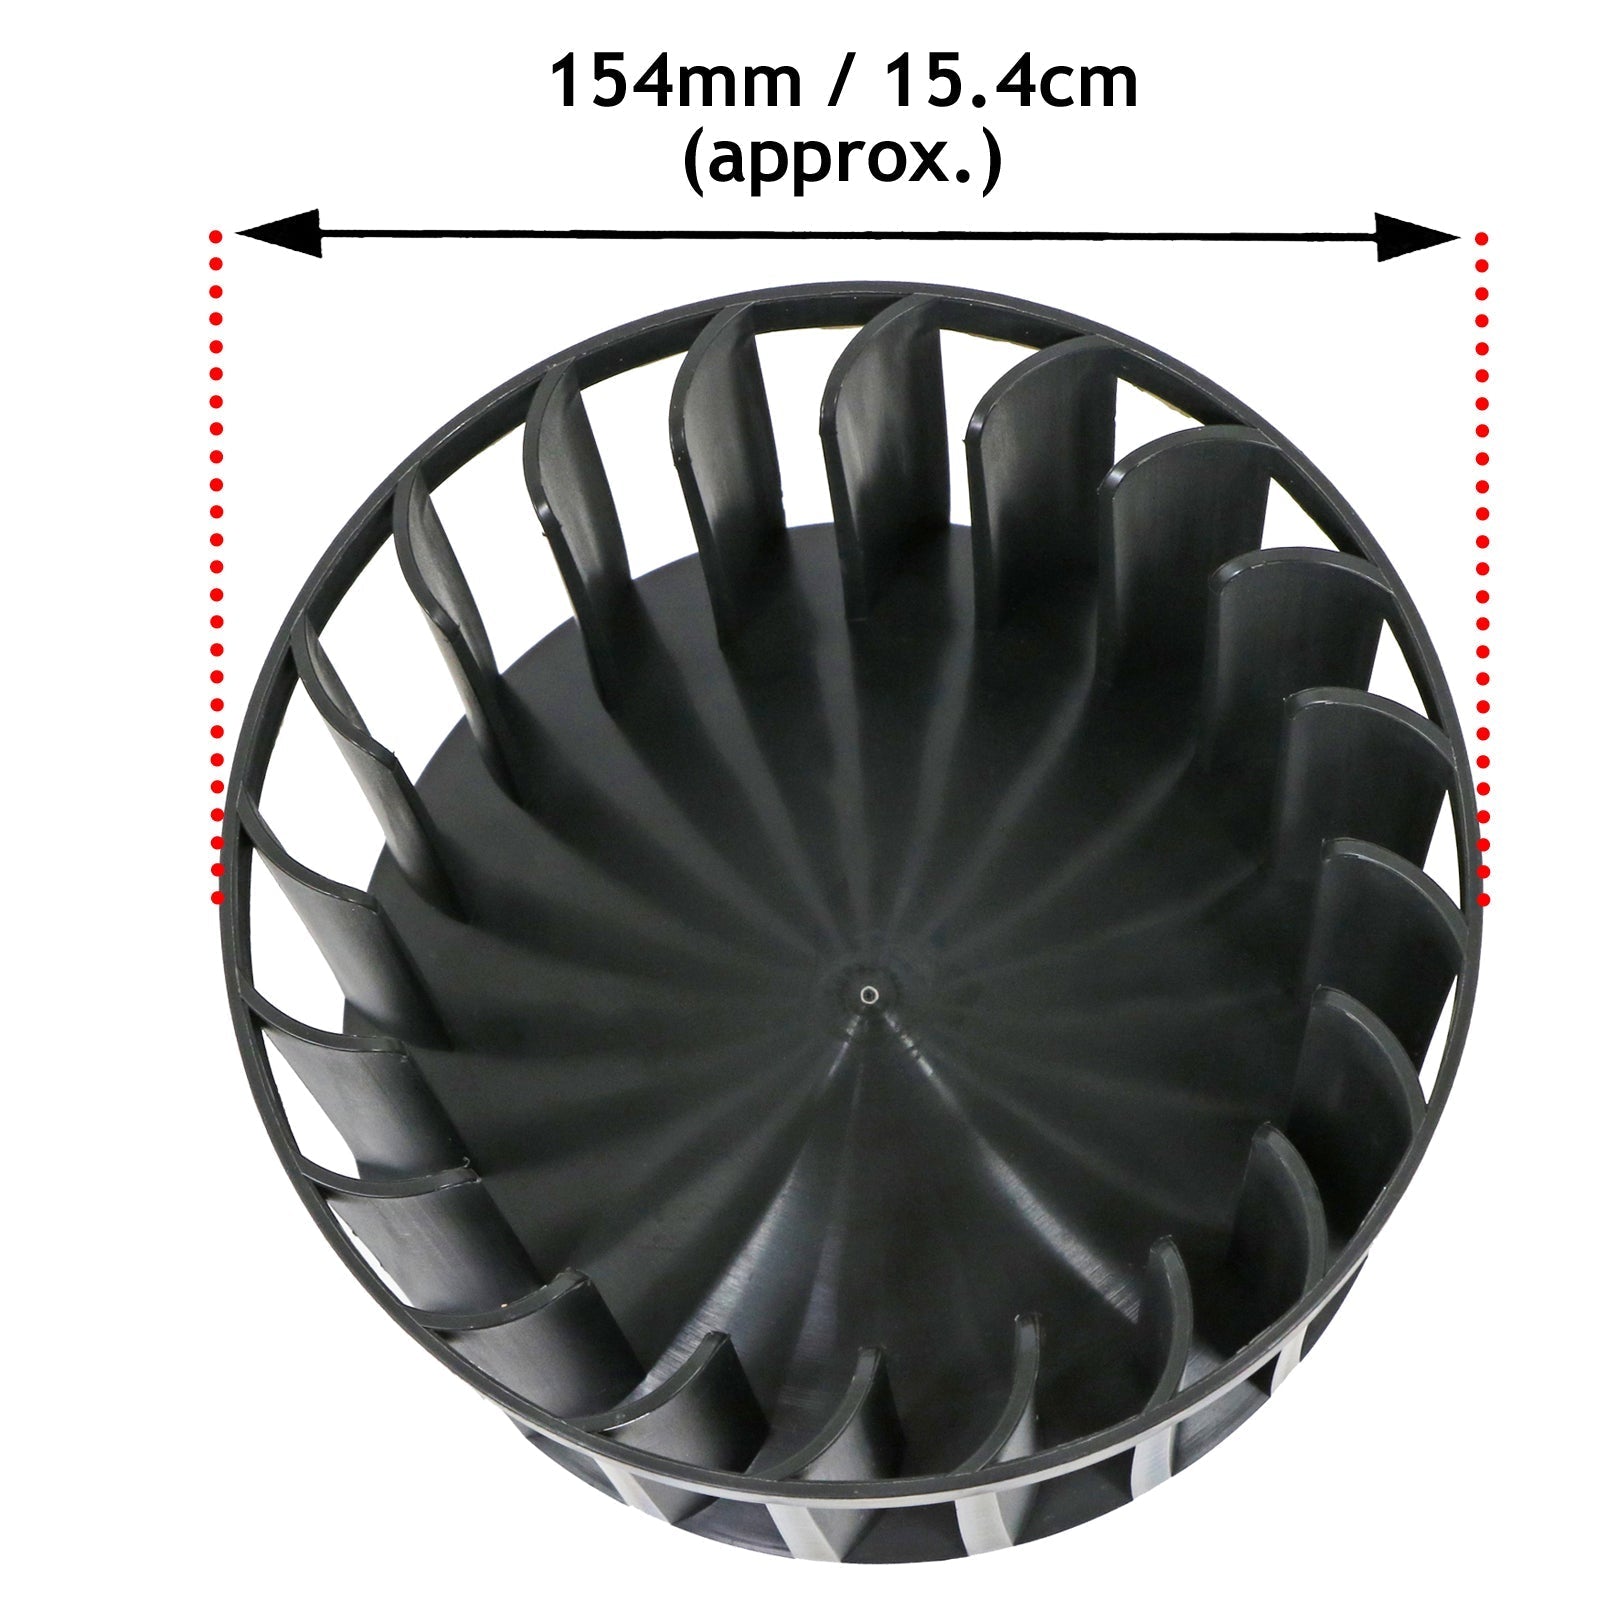 Fan Blade Assembly for Crosslee Tumble Dryer - Equiv' to 421307740896